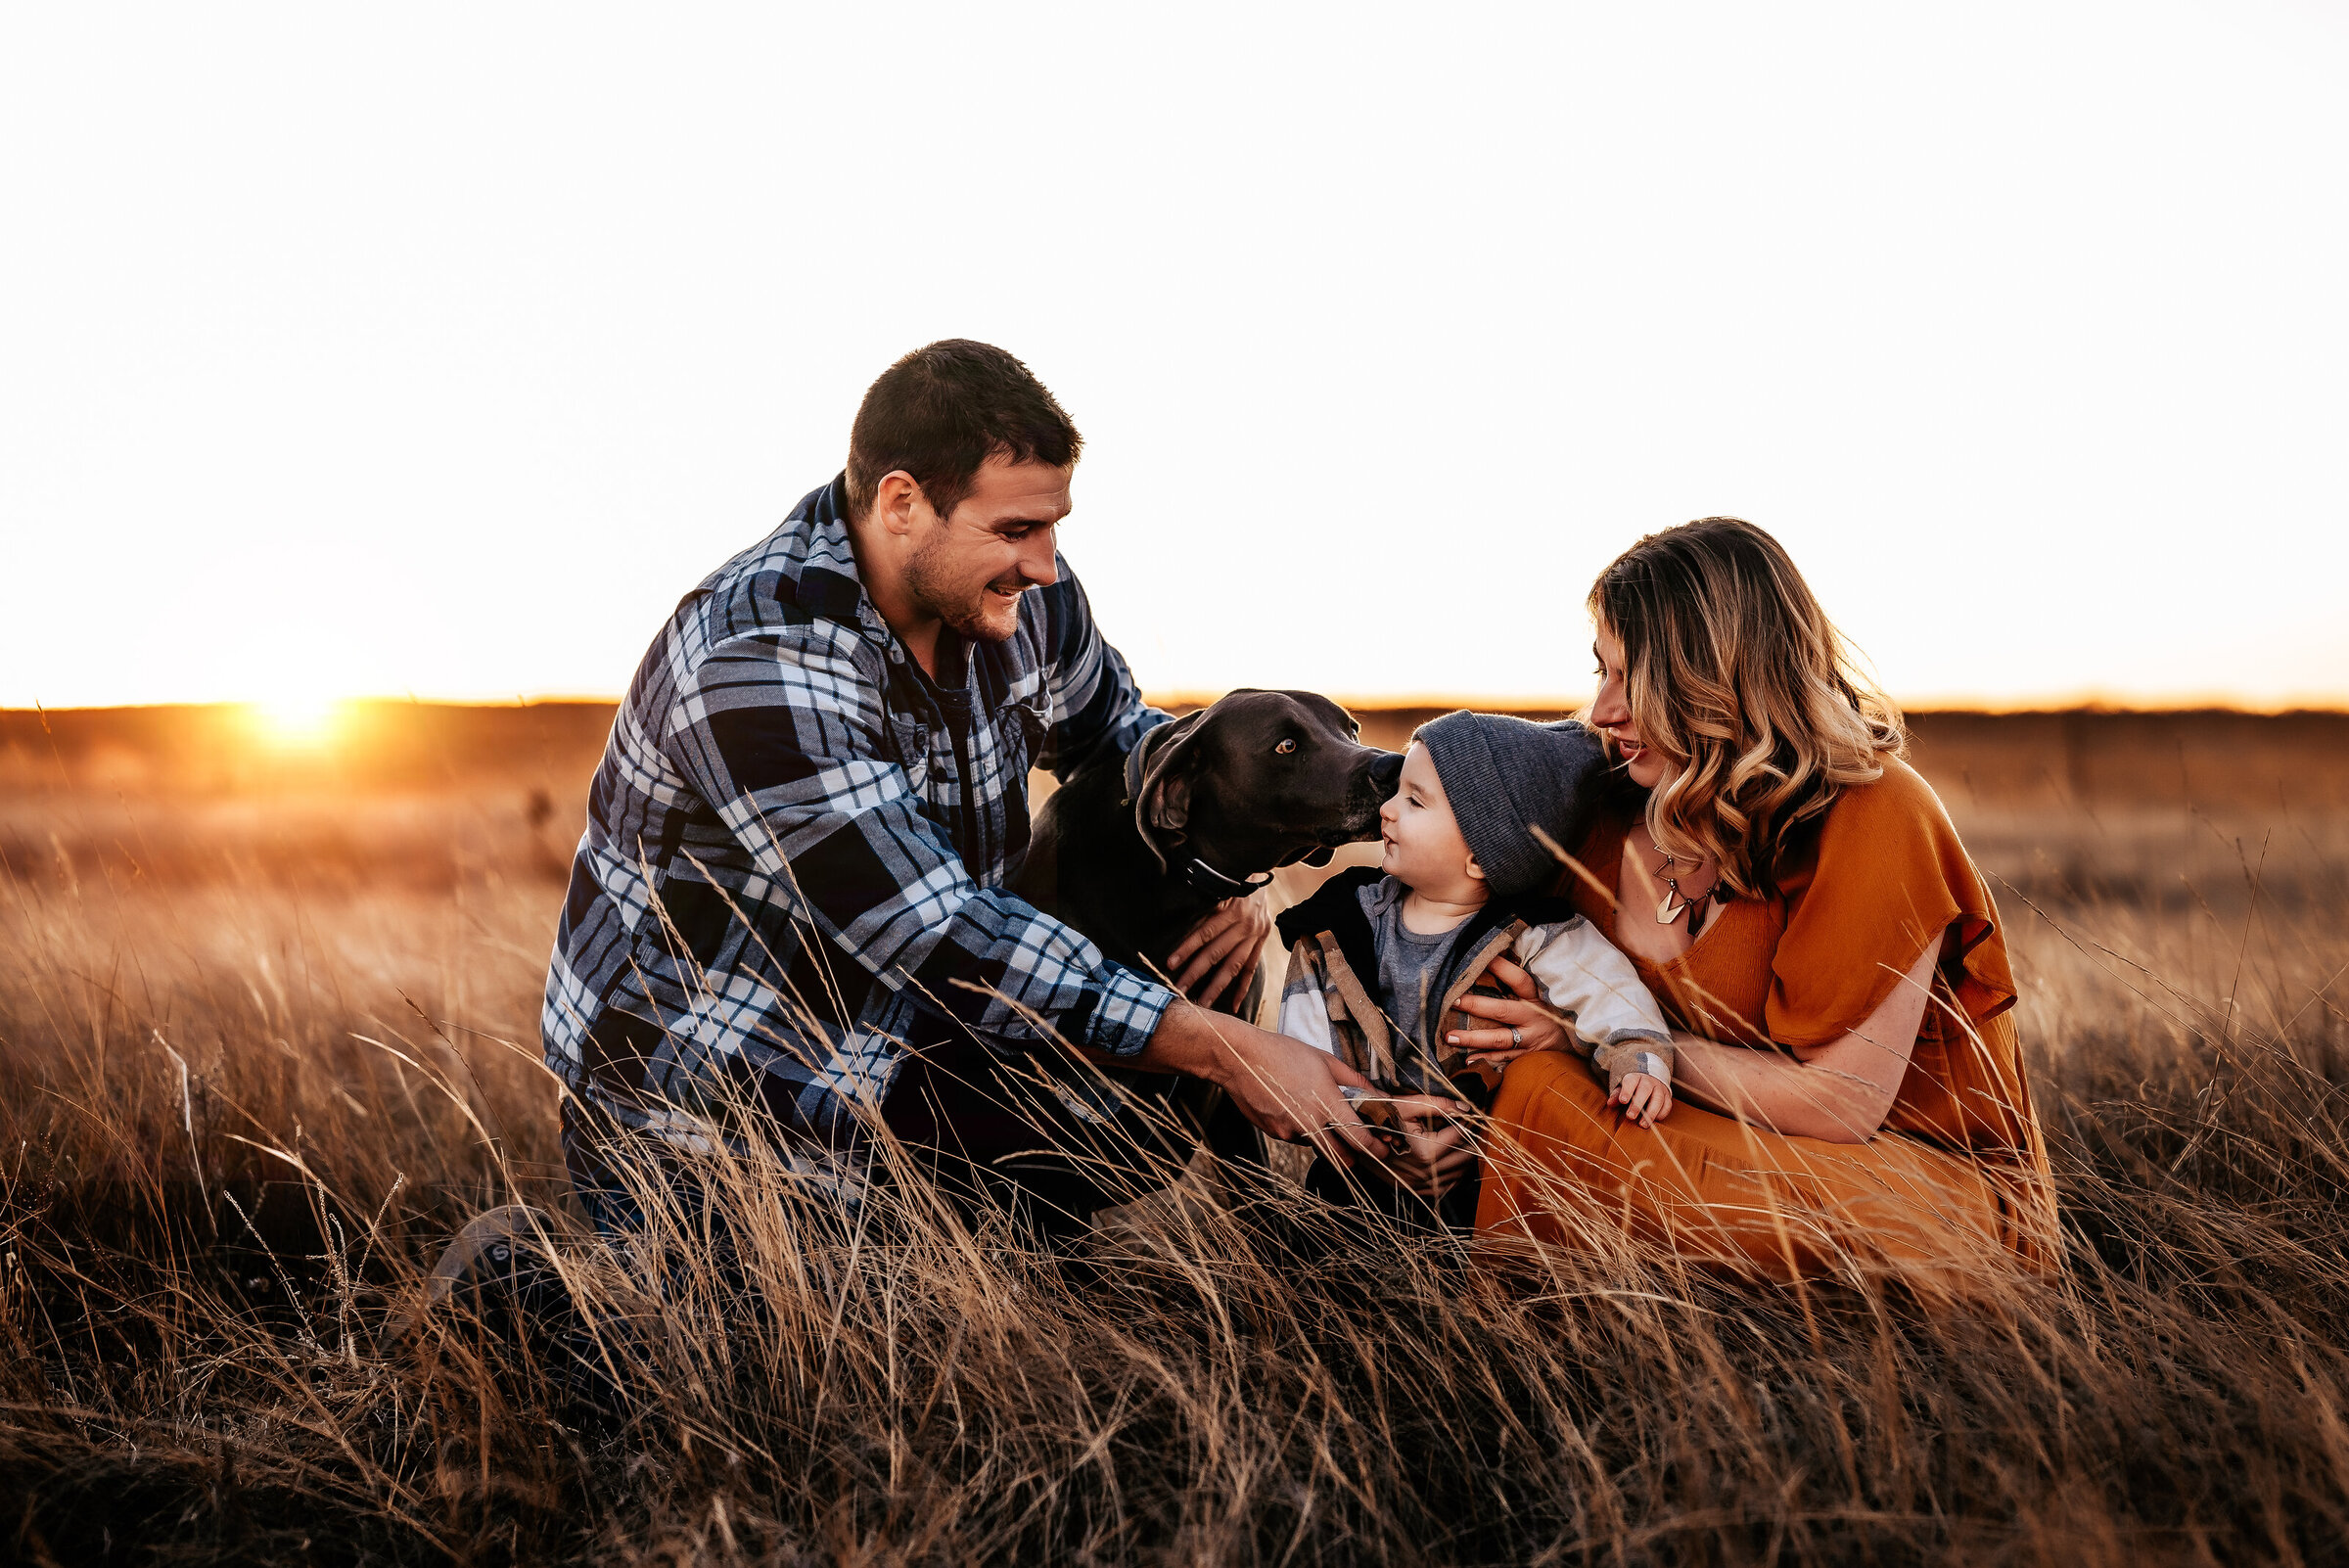 Mom, dad, and son sit next to their dog in a field